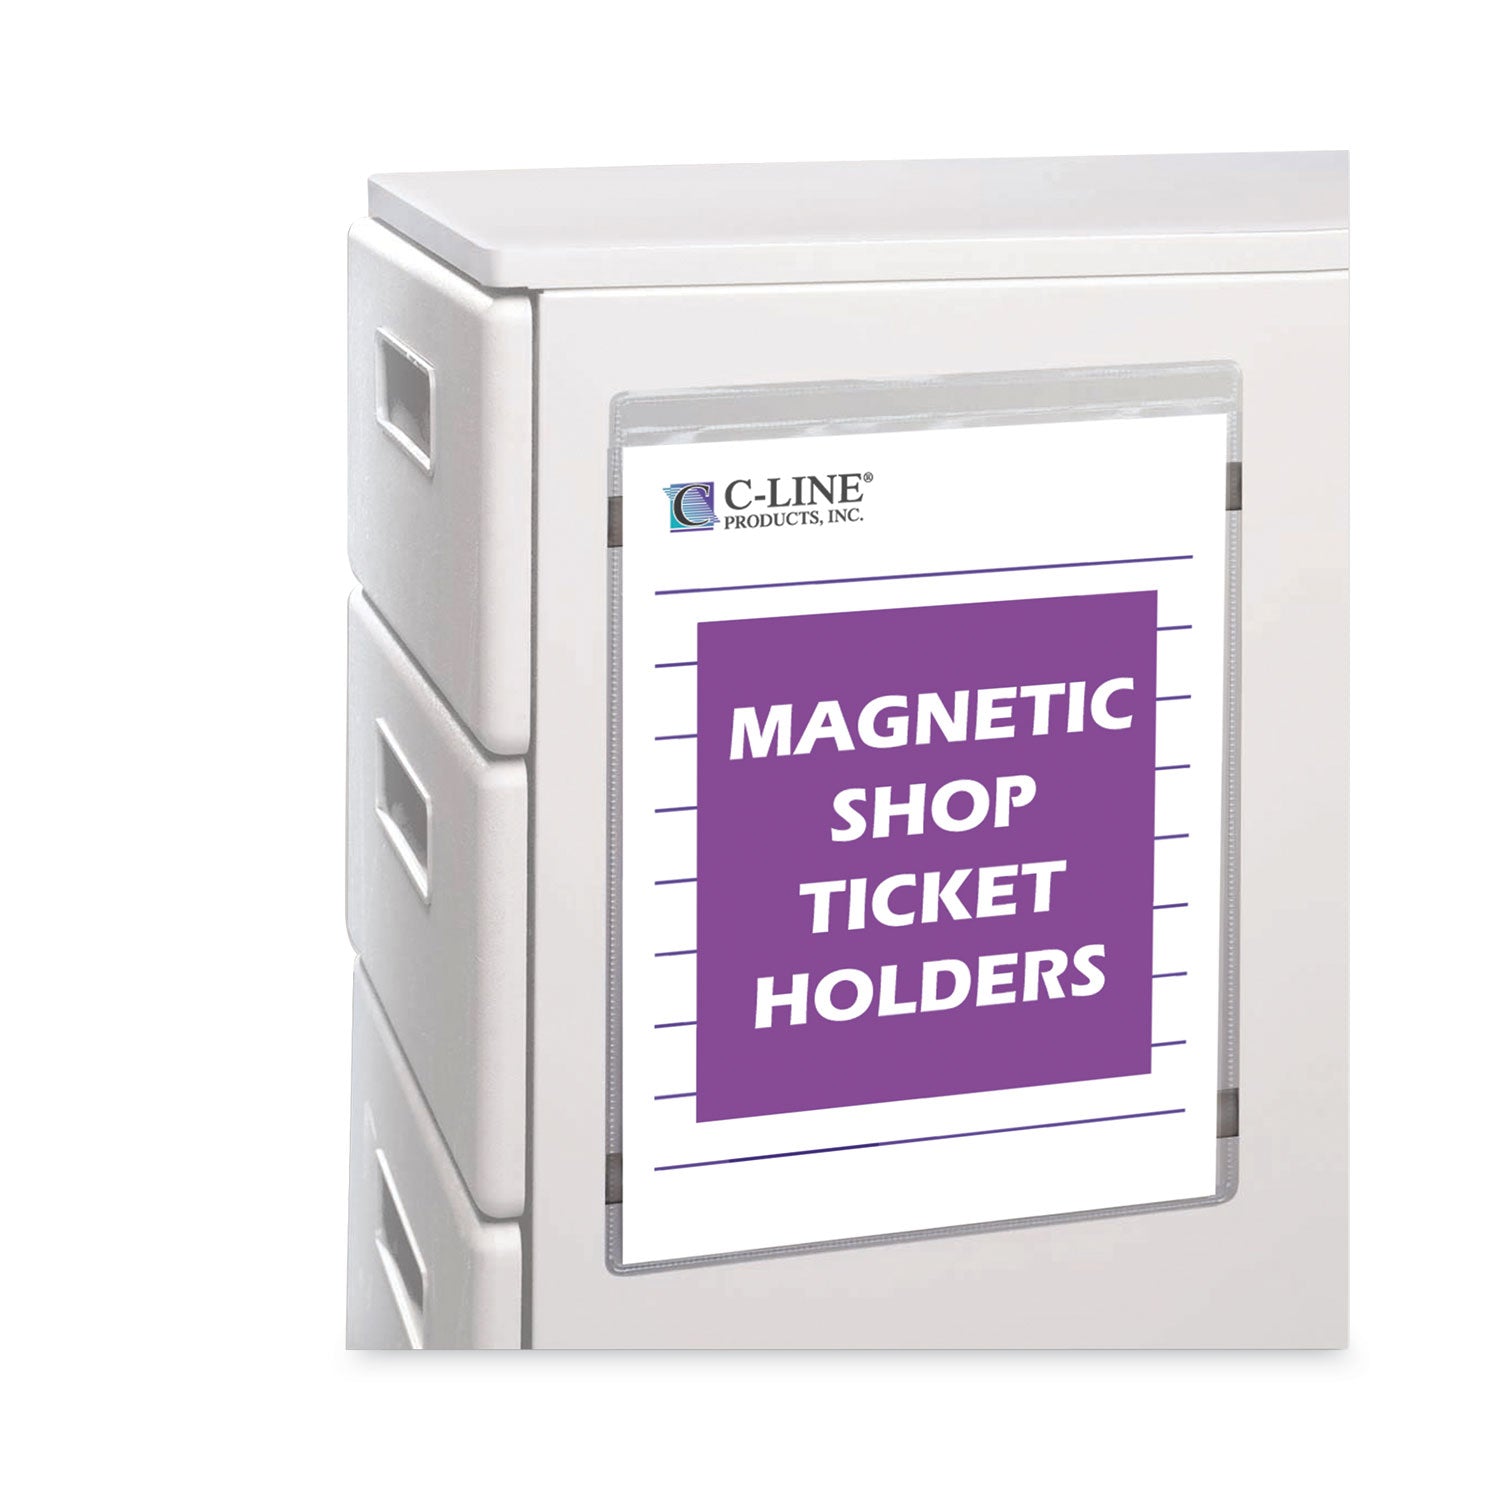 Magnetic Shop Ticket Holders, Super Heavyweight, 15 Sheets, 8.5 x 11, 15/Box - 